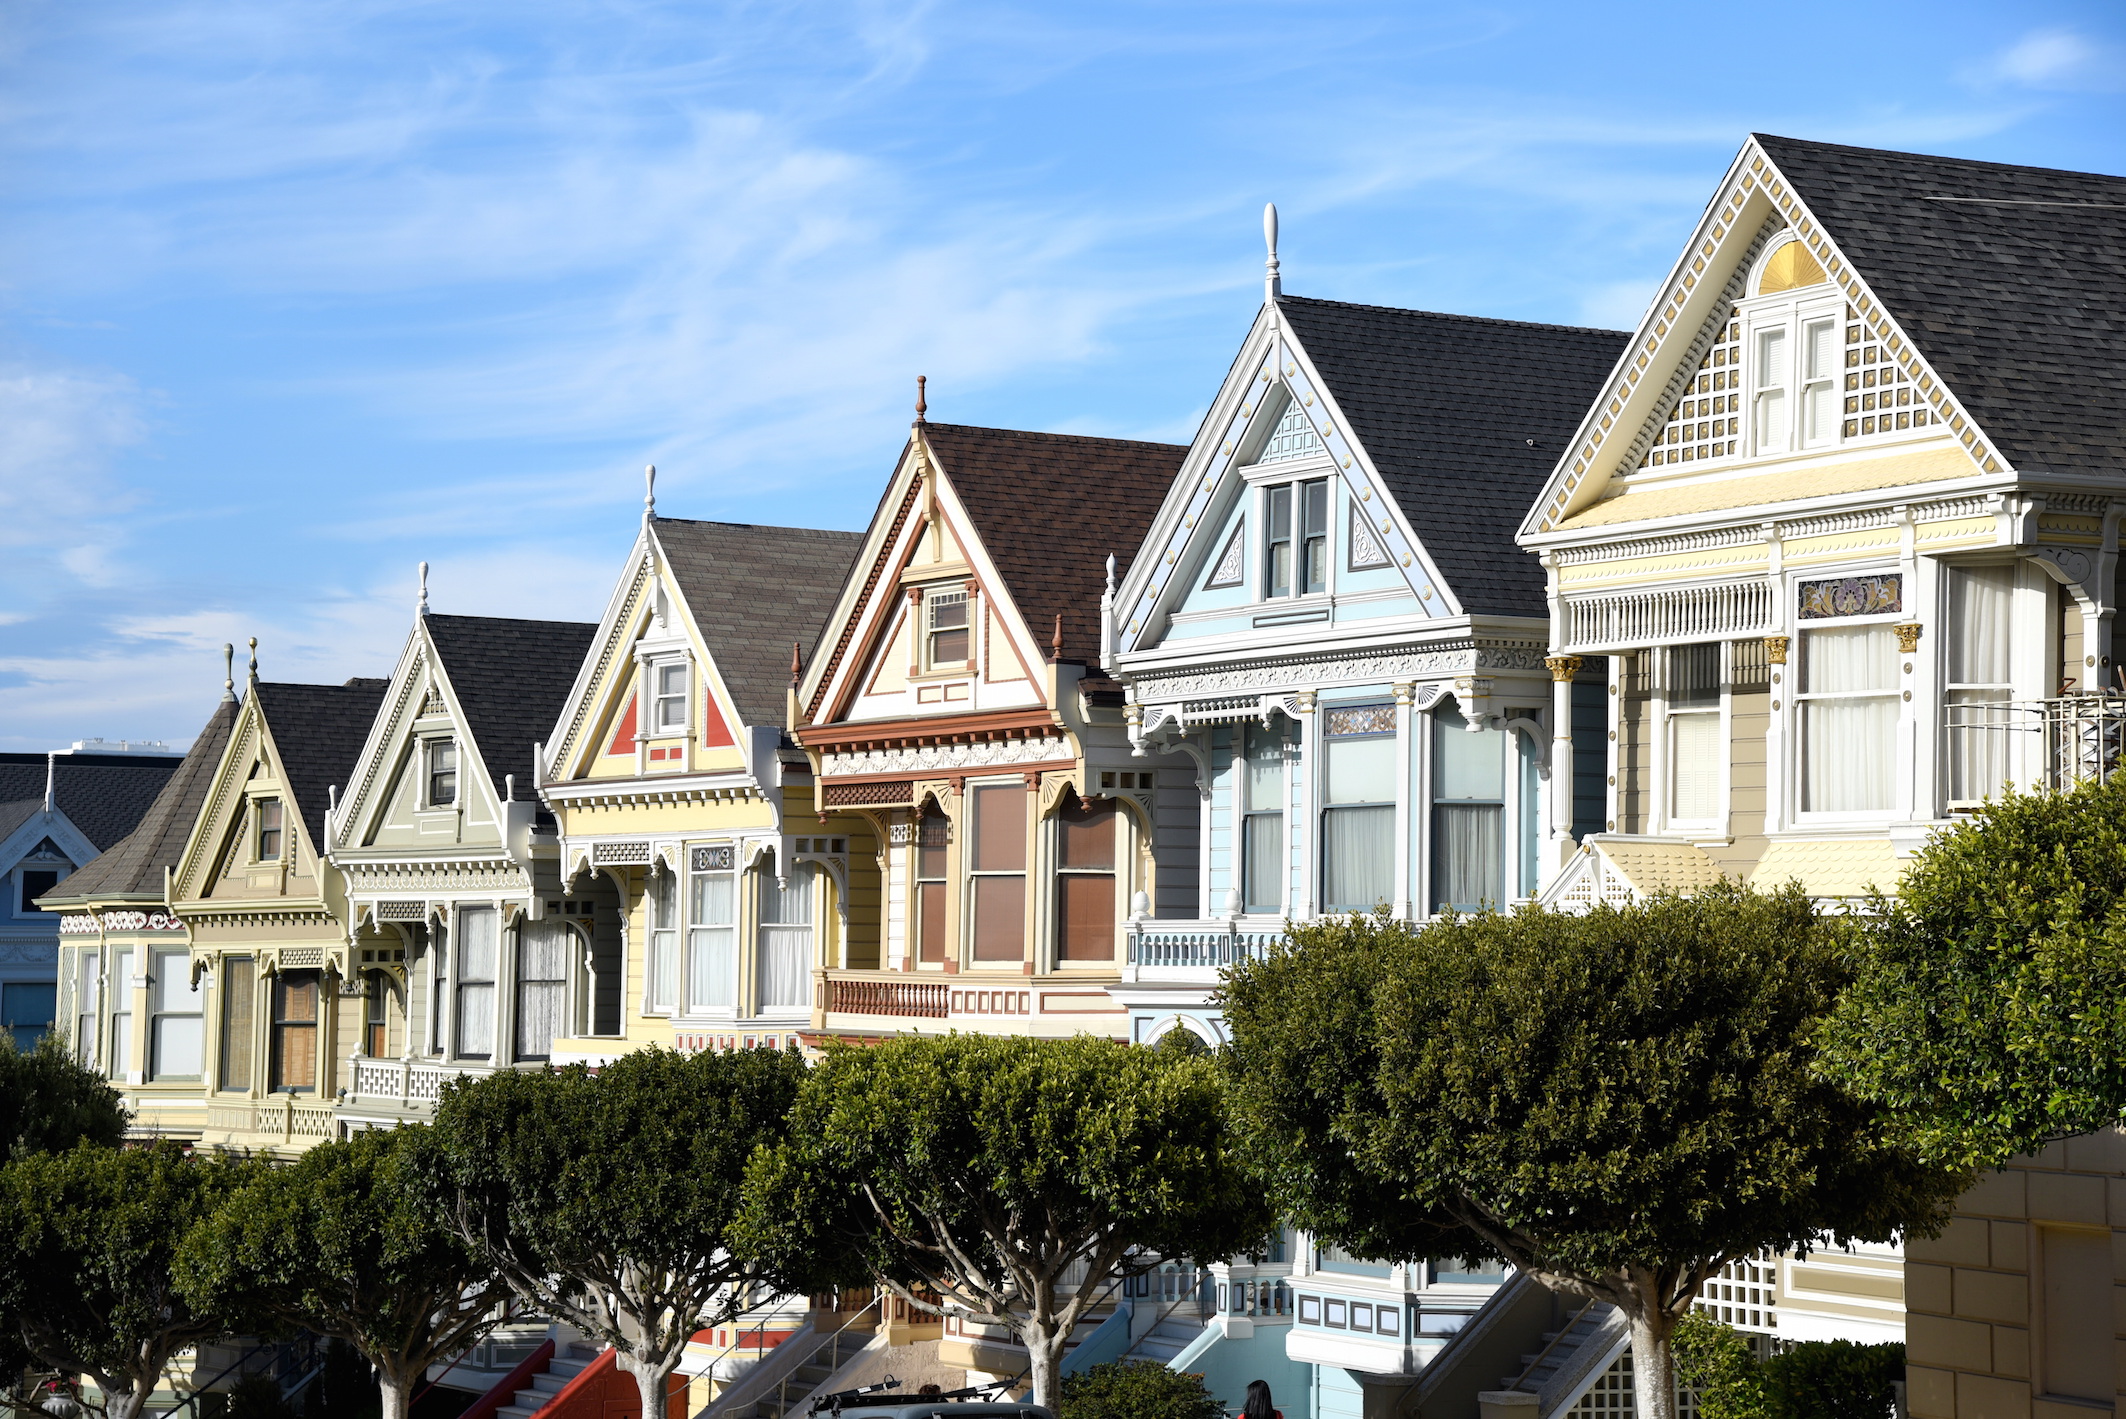 The Painted Ladies in San Francisco